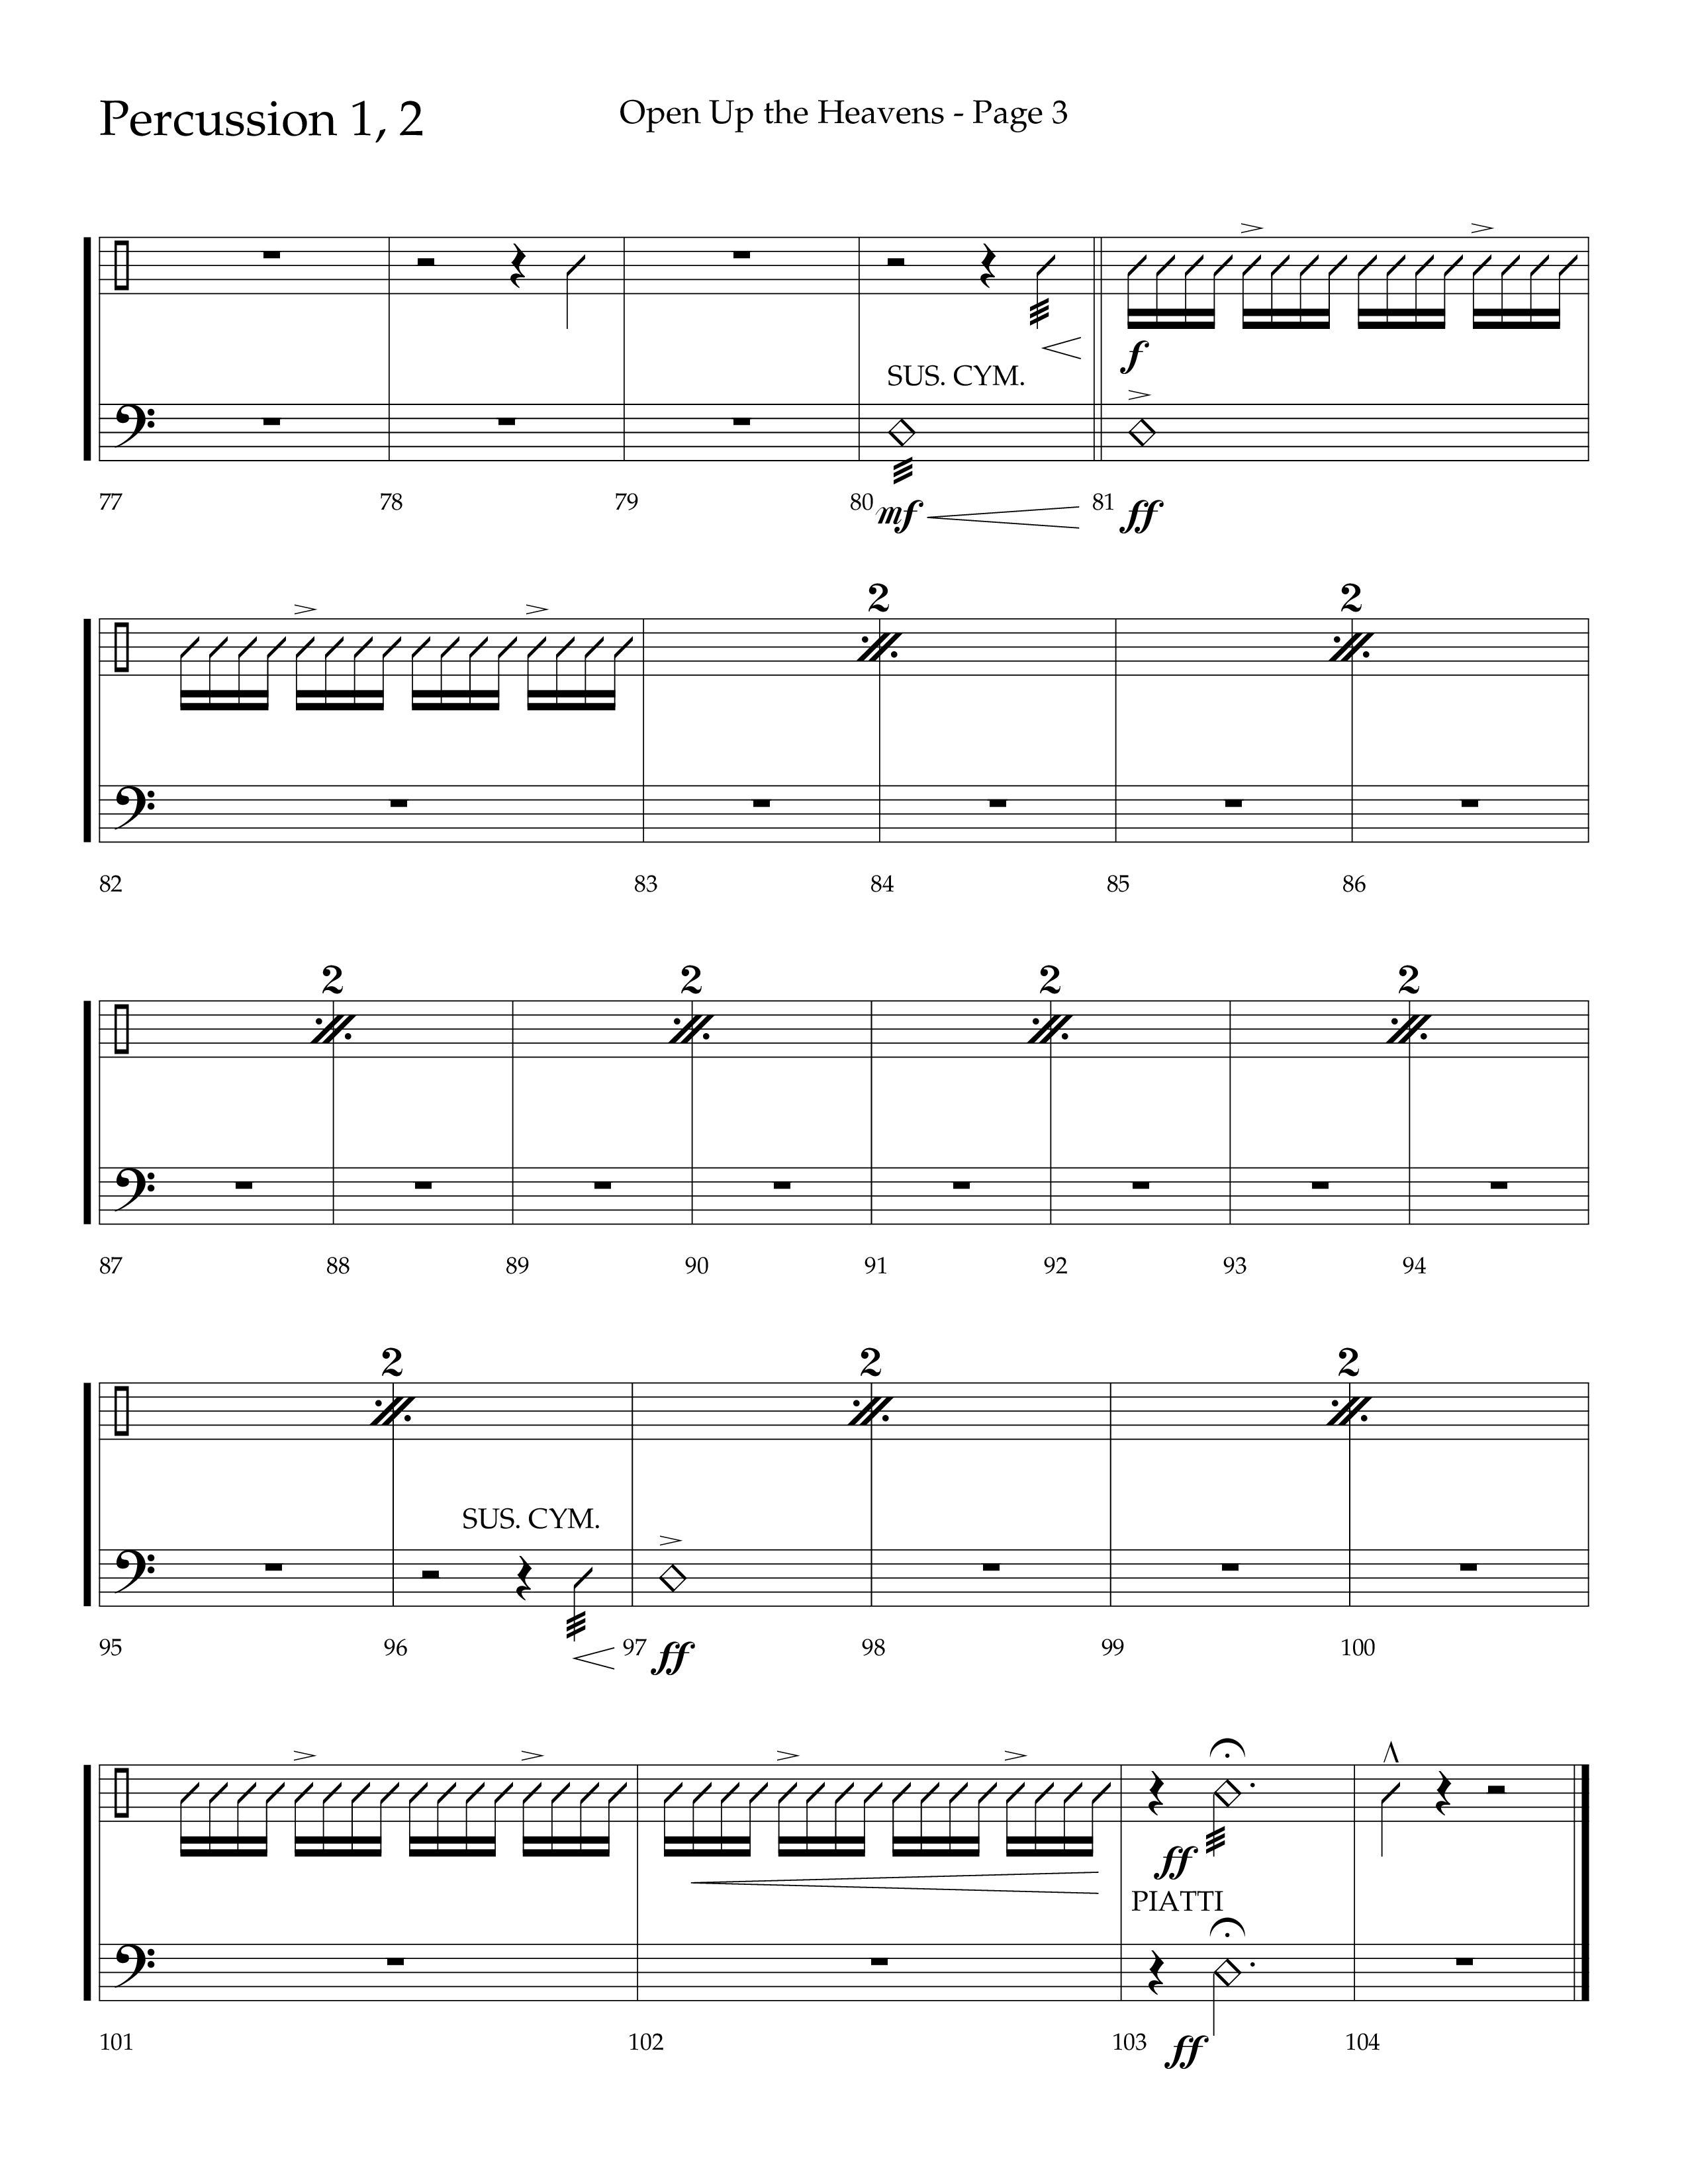 Open Up The Heavens (Choral Anthem SATB) Percussion 1/2 (Lifeway Choral / Arr. Cliff Duren)